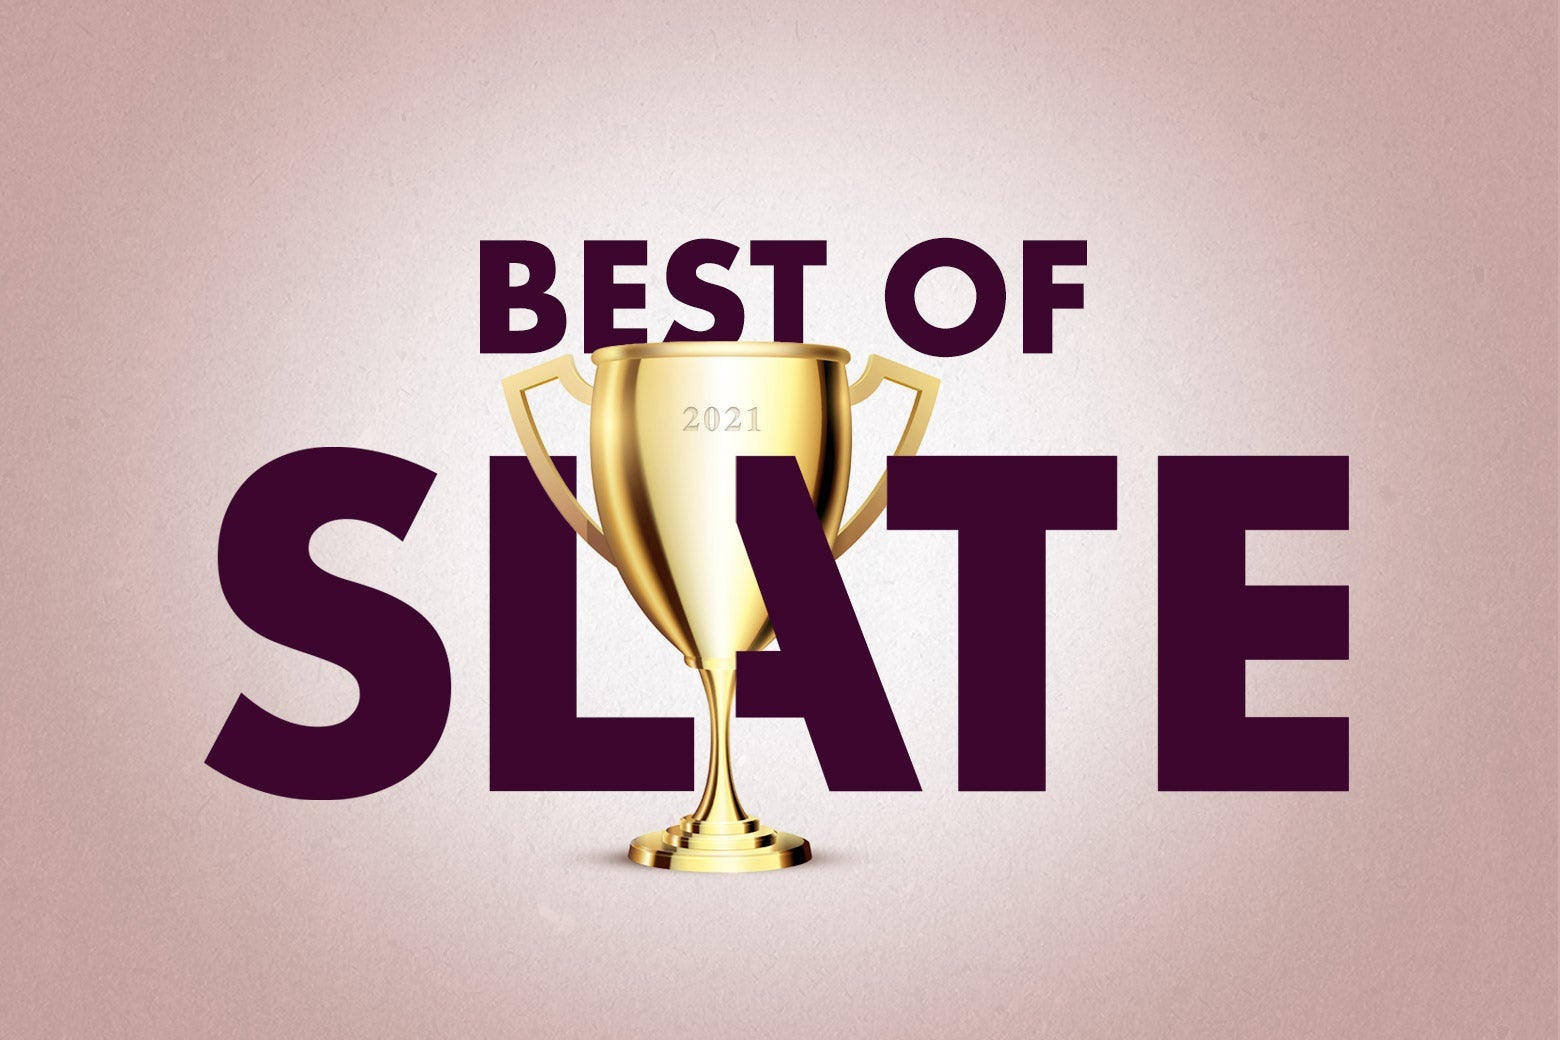 a gold trophy and the words "Best of Slate" against a champagne pink background